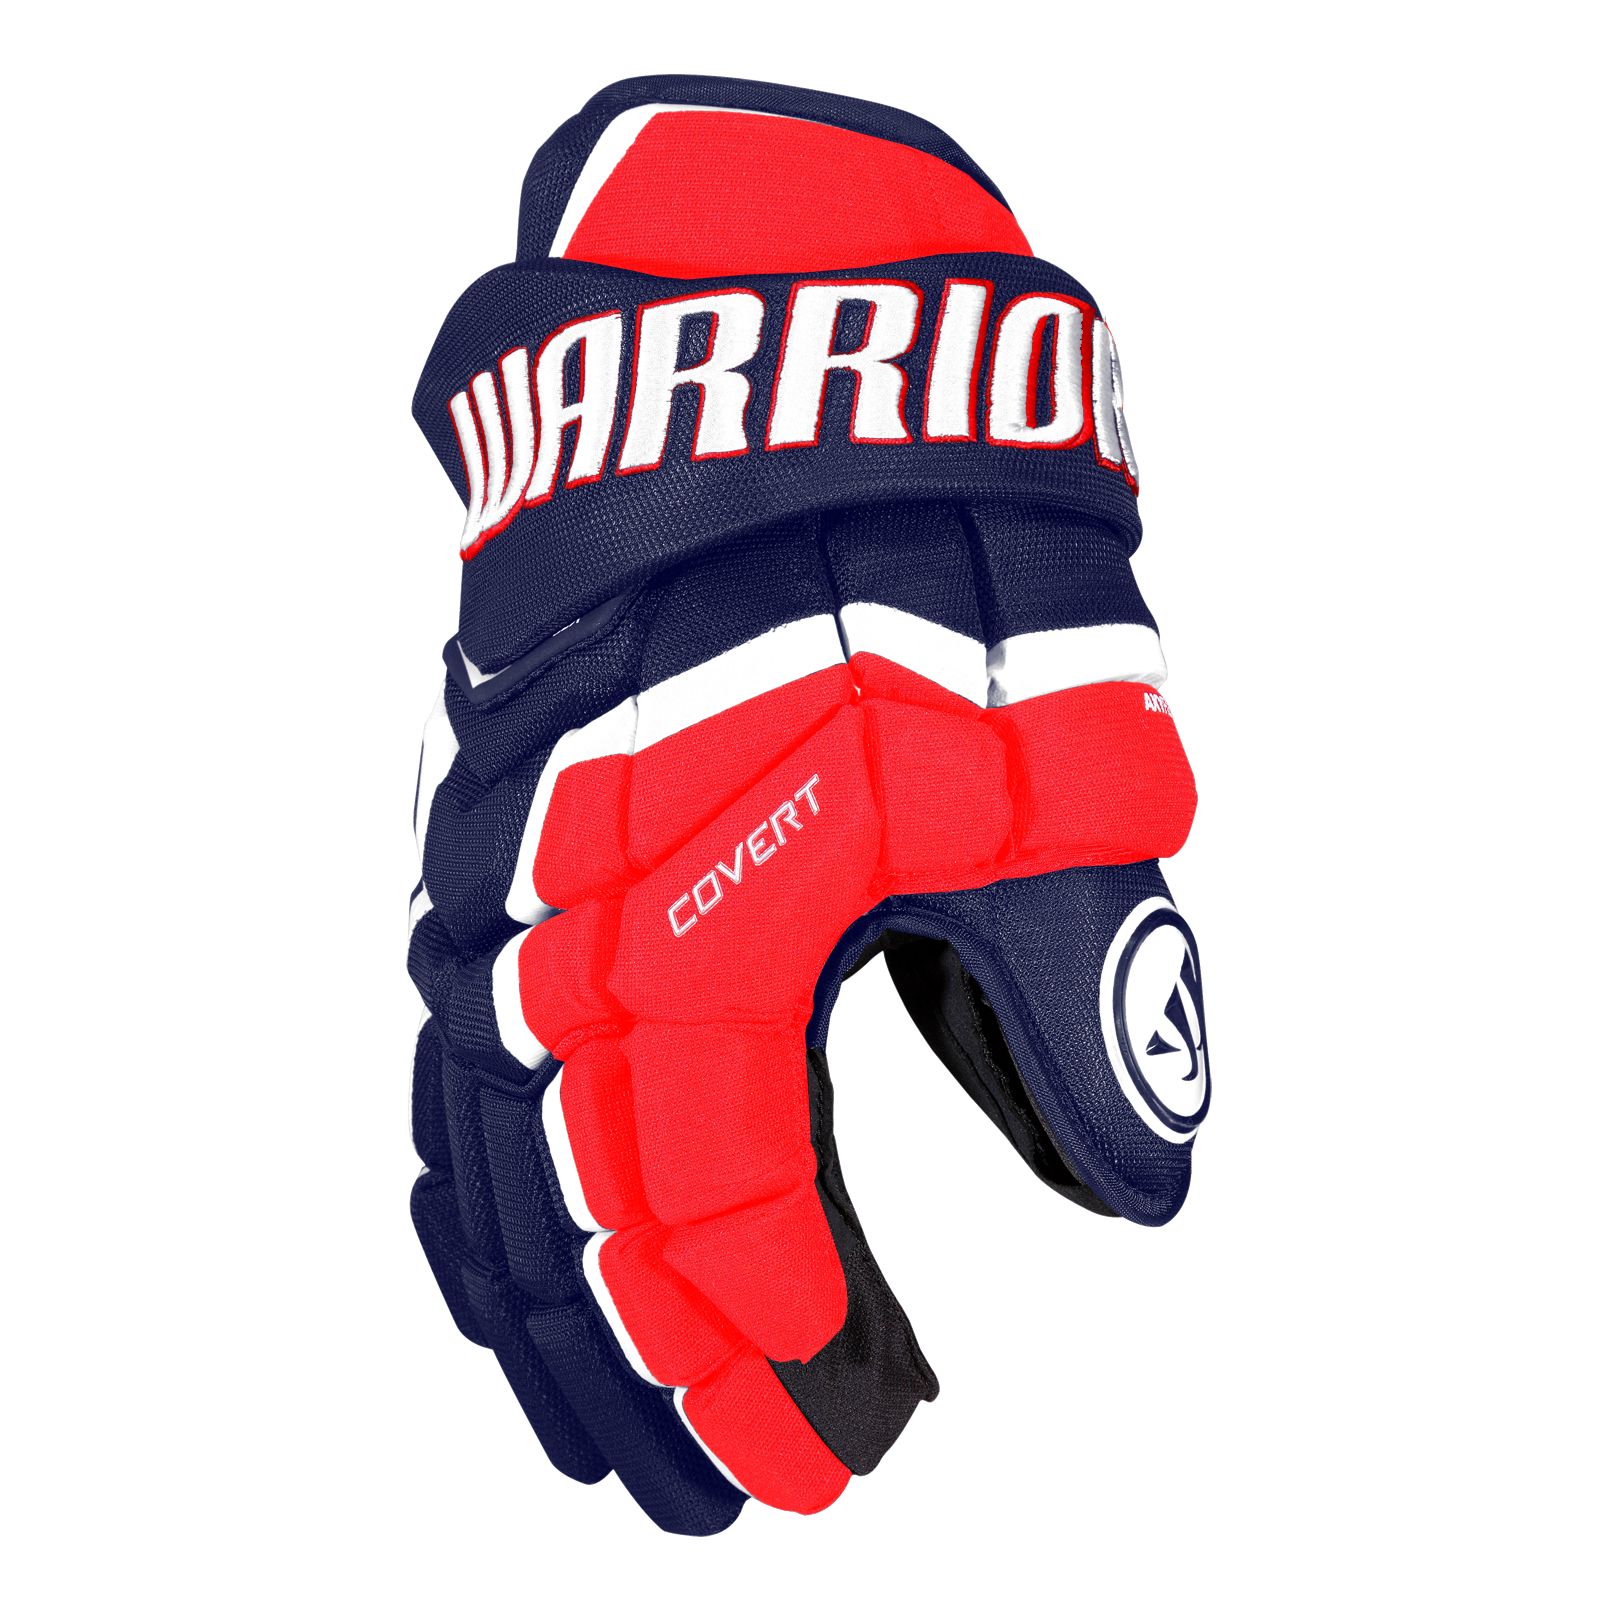 Covert QRL Pro Int. Glove, Navy with Red & White image number 0